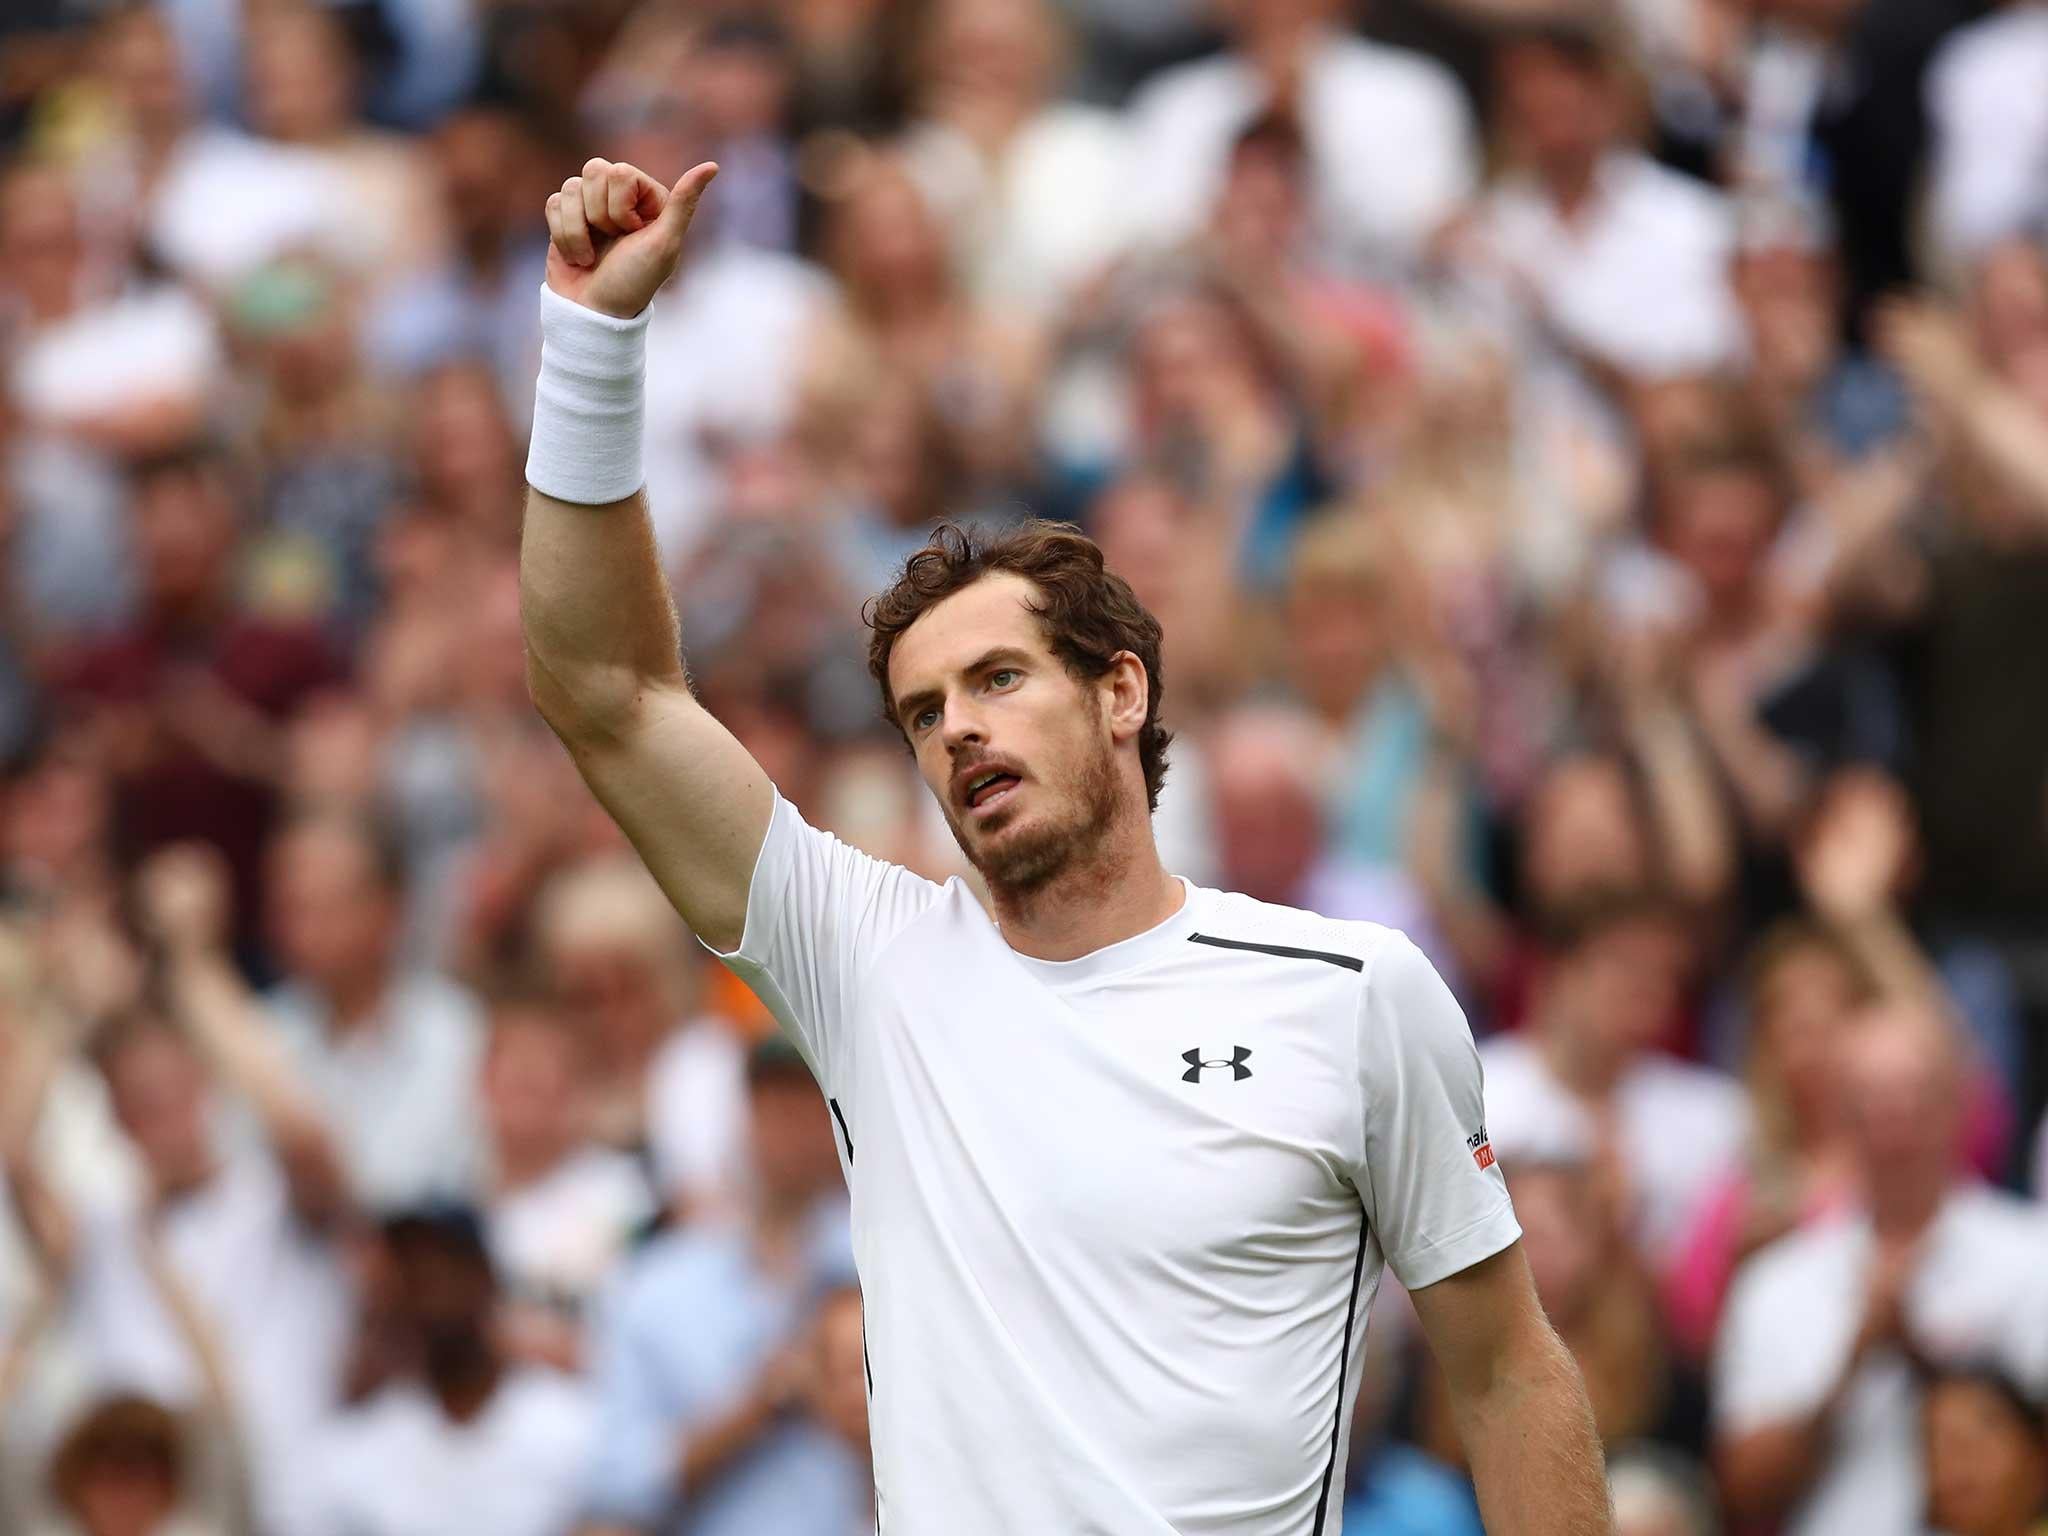 Andy Murray celebrates on Centre Court after getting off to a winning start